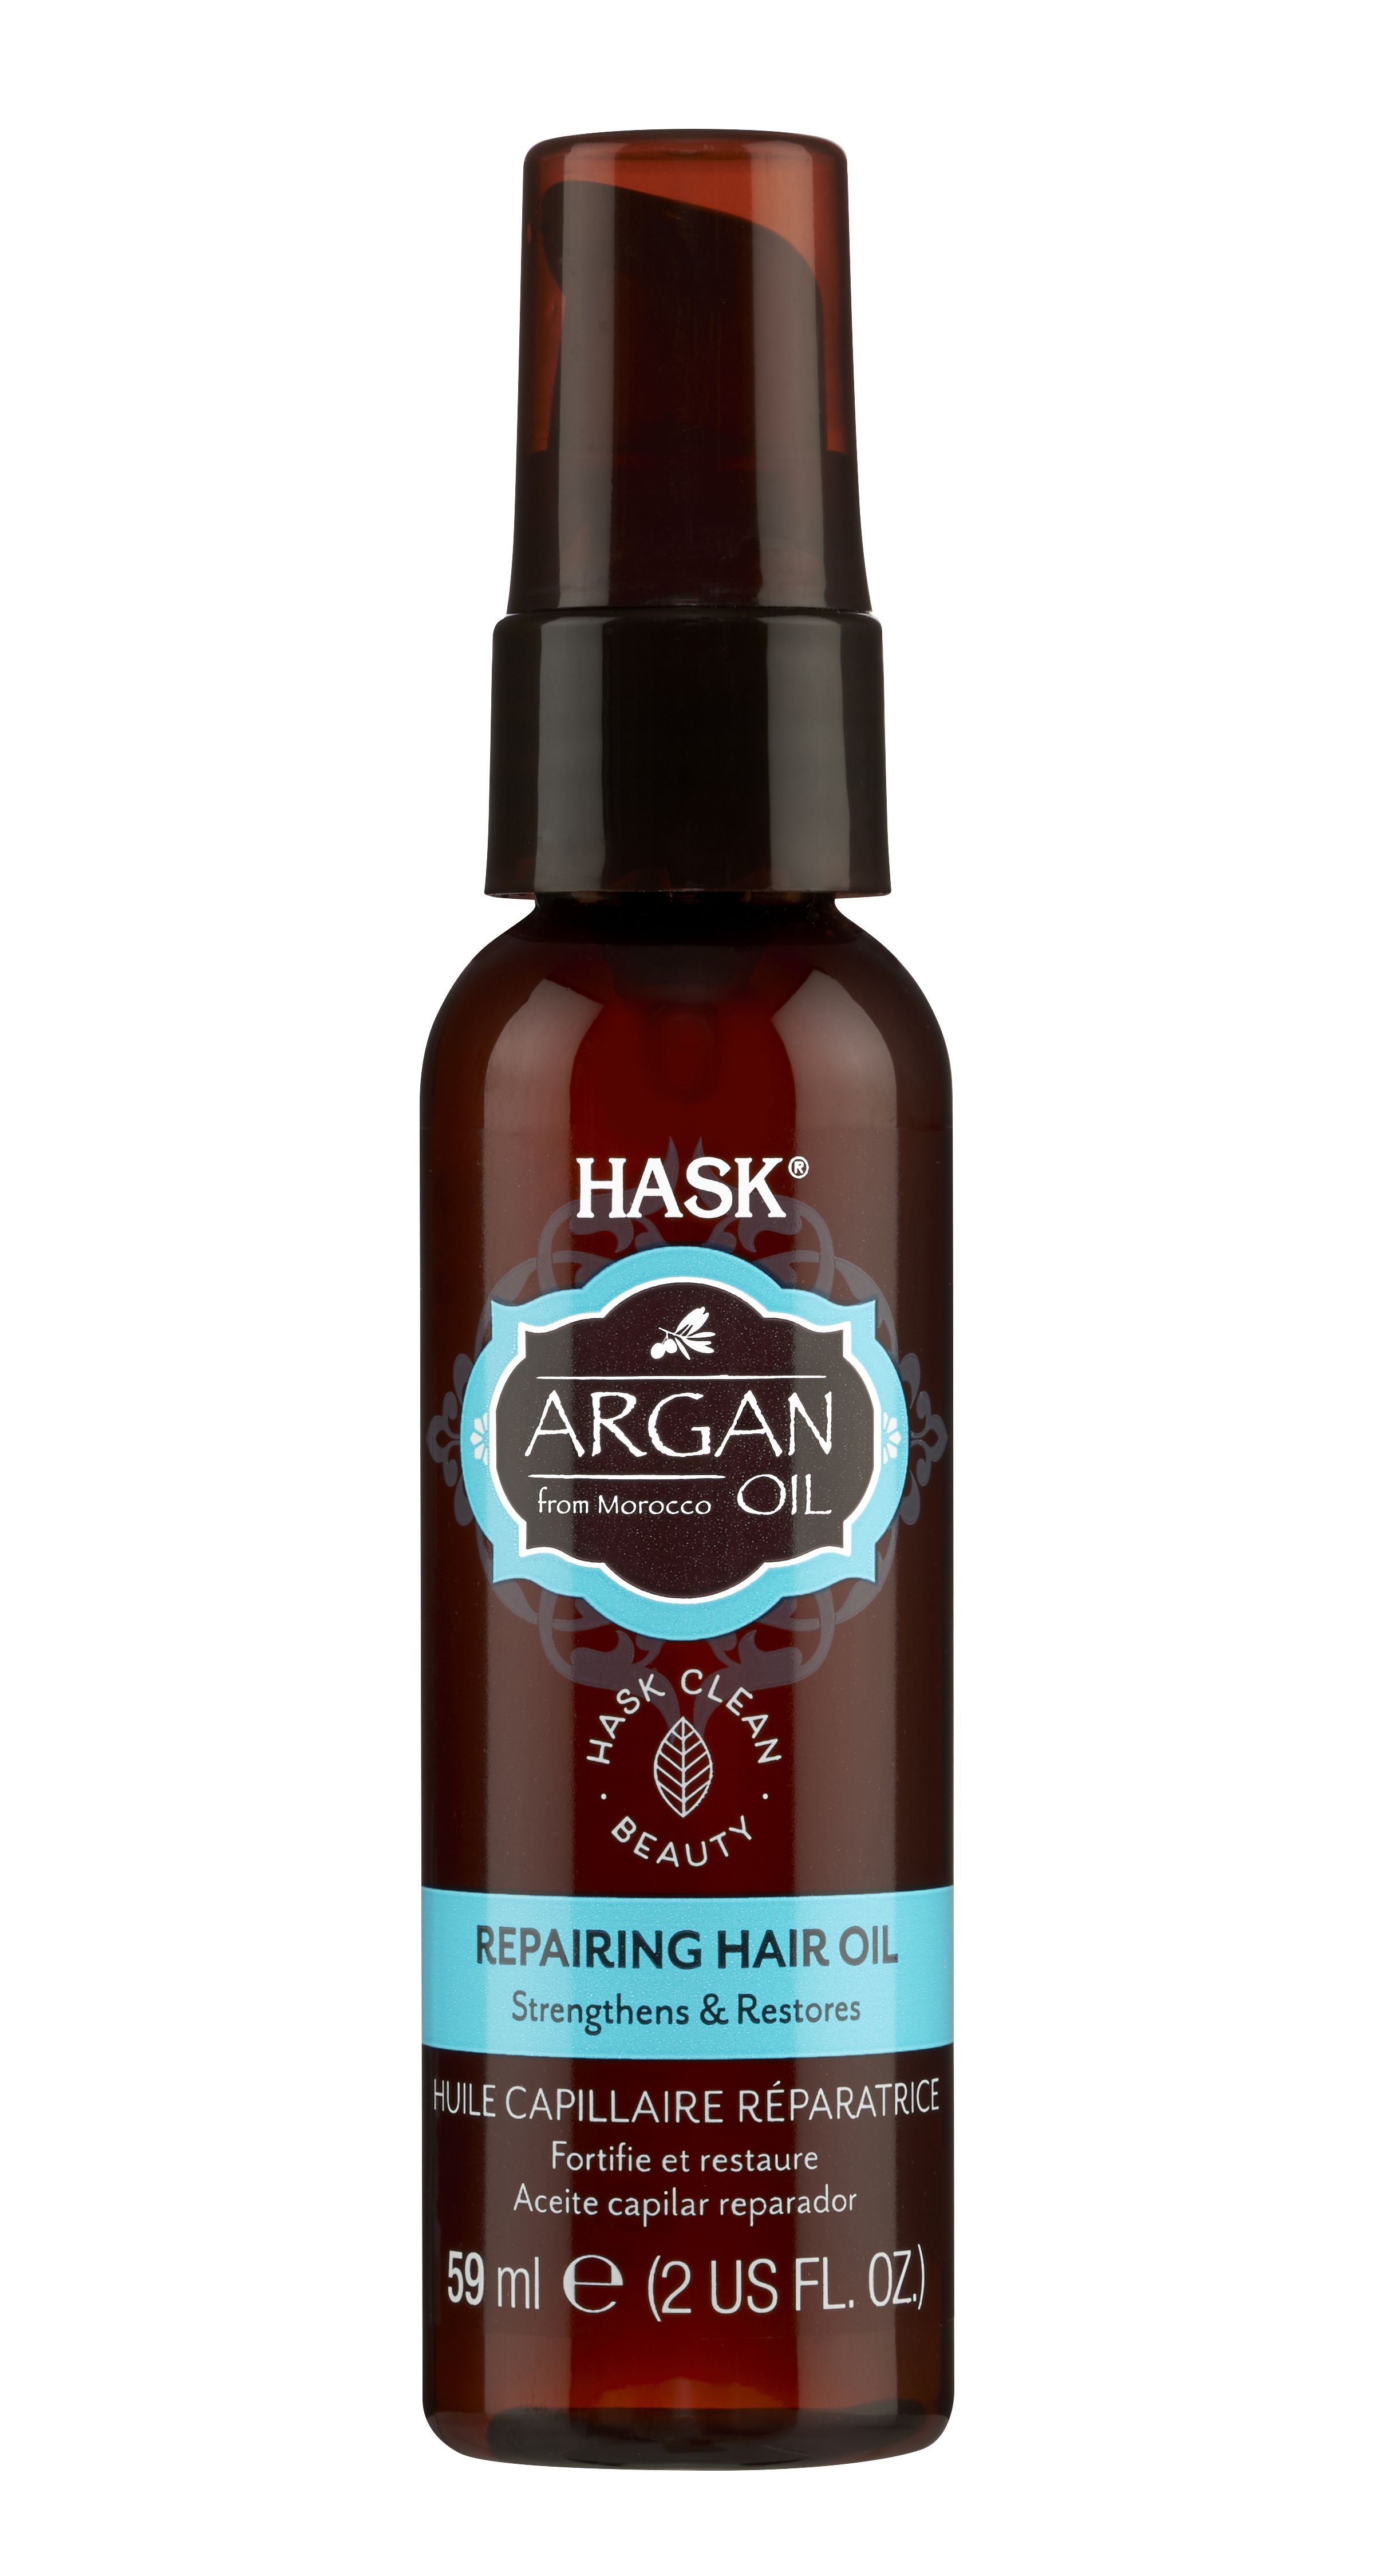 HASK Argan Oil from Morocco Repairing Sulfate-Free Shine Hair Oil, 2 fl. oz - image 1 of 11